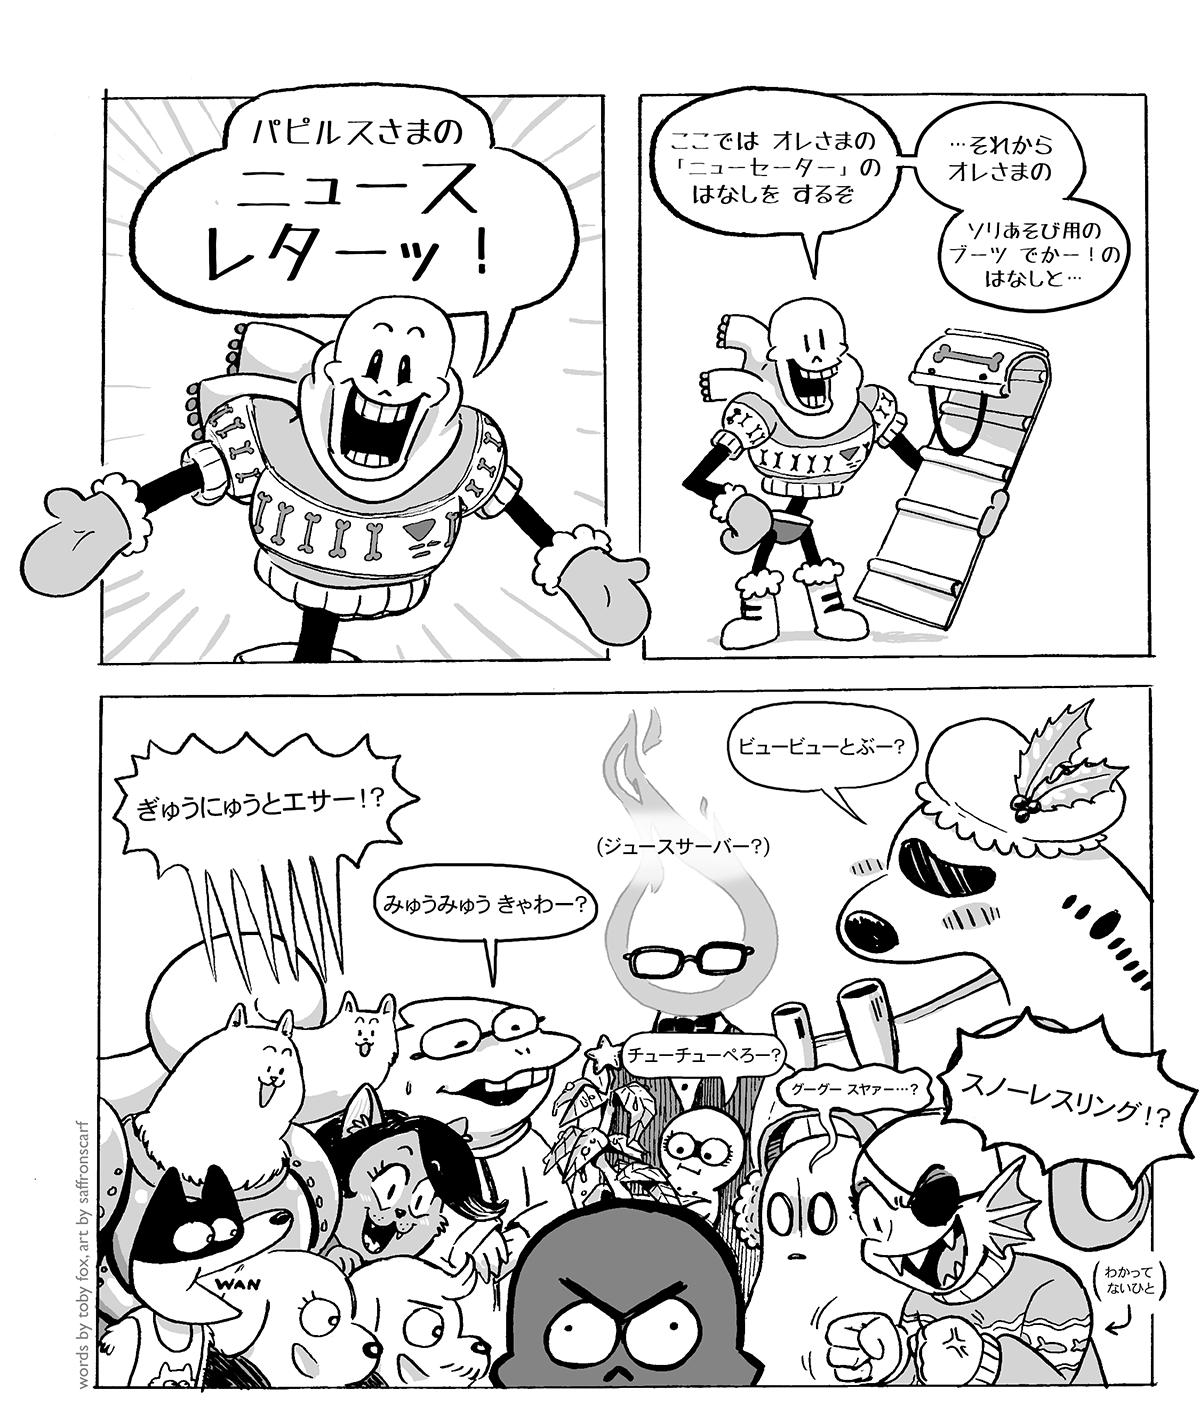 Page one of two. Three panels. First panel shows Papyrus in a holiday sweater, exclaiming 'WELCOME TO PAPYRUS'S NEWSLETTER!'. Second panel shows Papyrus holding a scarf, saying 'HERE I WILL TALK ABOUT MY NEW SWEATER, MY NEW SLEDDER, AND IF TIME PERMITS, MY...'. Third panel shows Papyrus upset, as many characters from Snowdin appear. Snow dogs ask 'New petter!?', Alphys asks 'M...Mew getter?', Grillby asks 'Brew setter?', Tsunderplane asks 'N-new jetter!?', Napstablook asks '...new better...?', Undyne doesn't get it and asks 'SNOW WRESTLING!?'